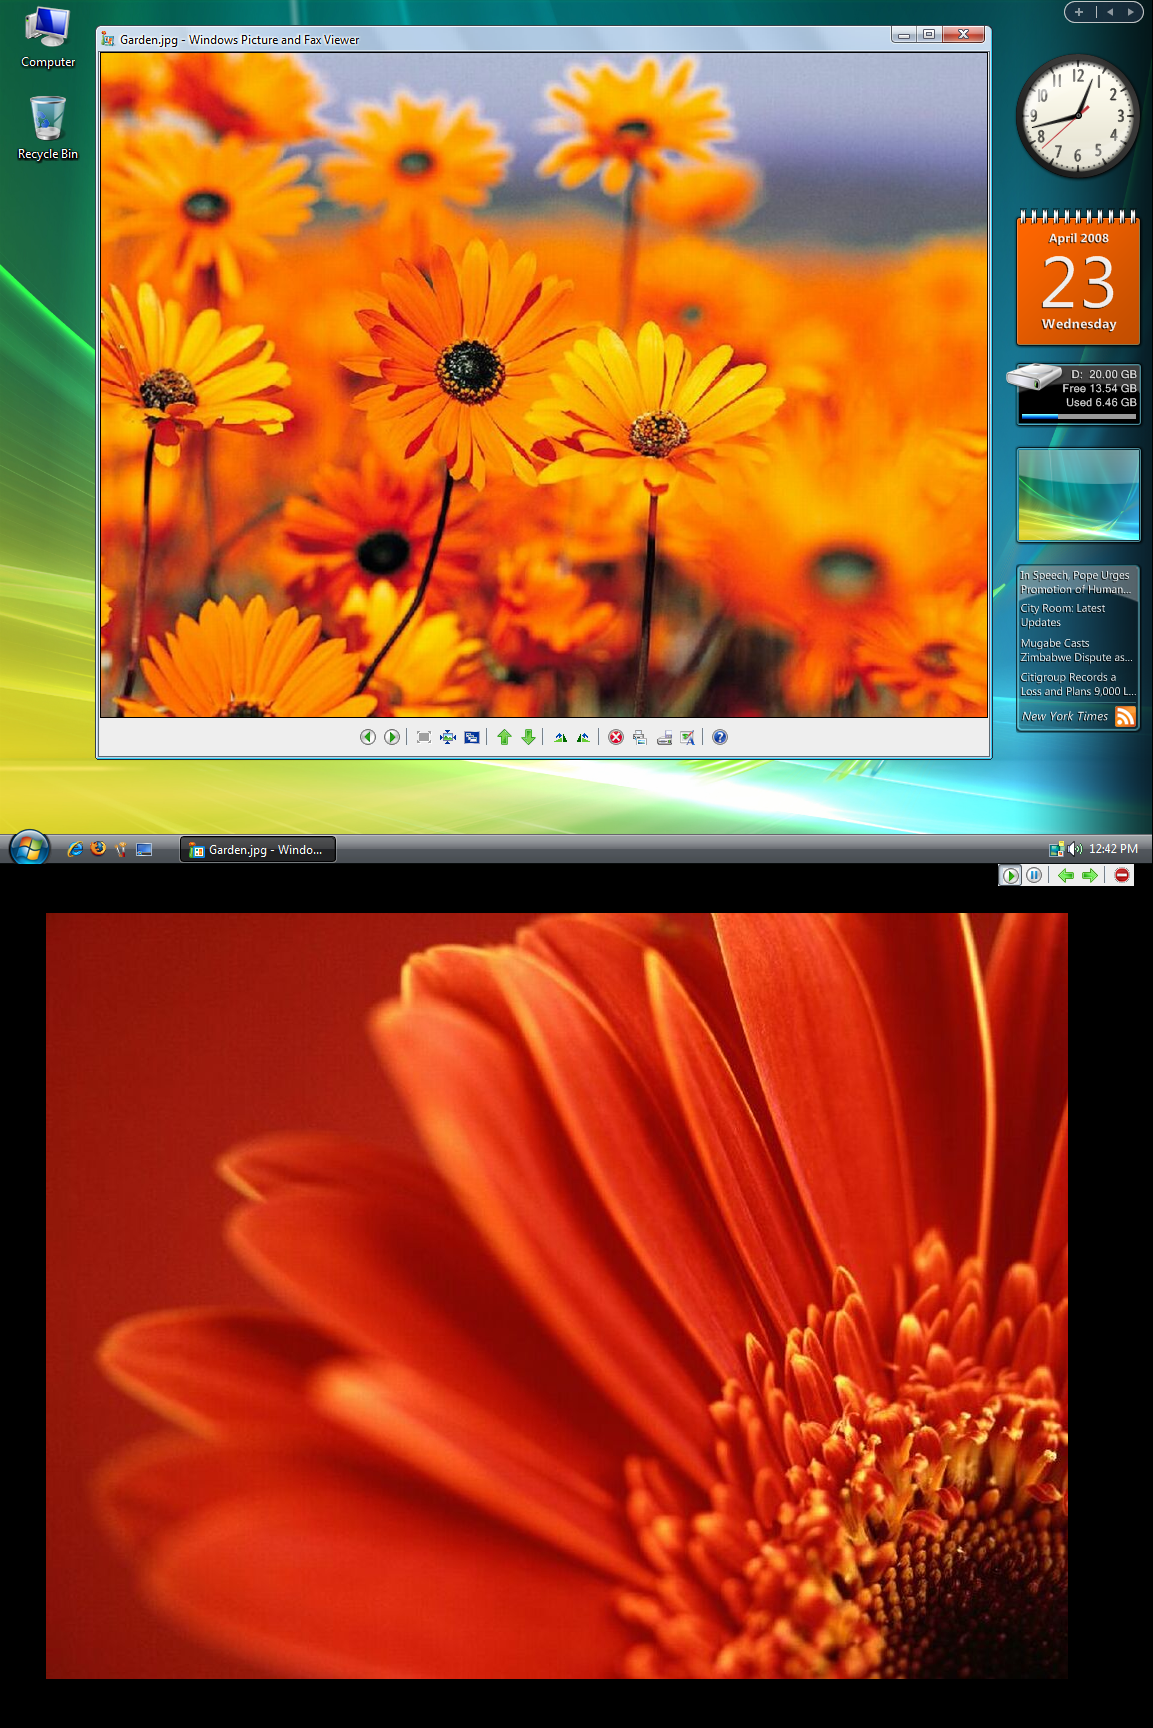 Windows Photo And Fax Viewer Xp Download